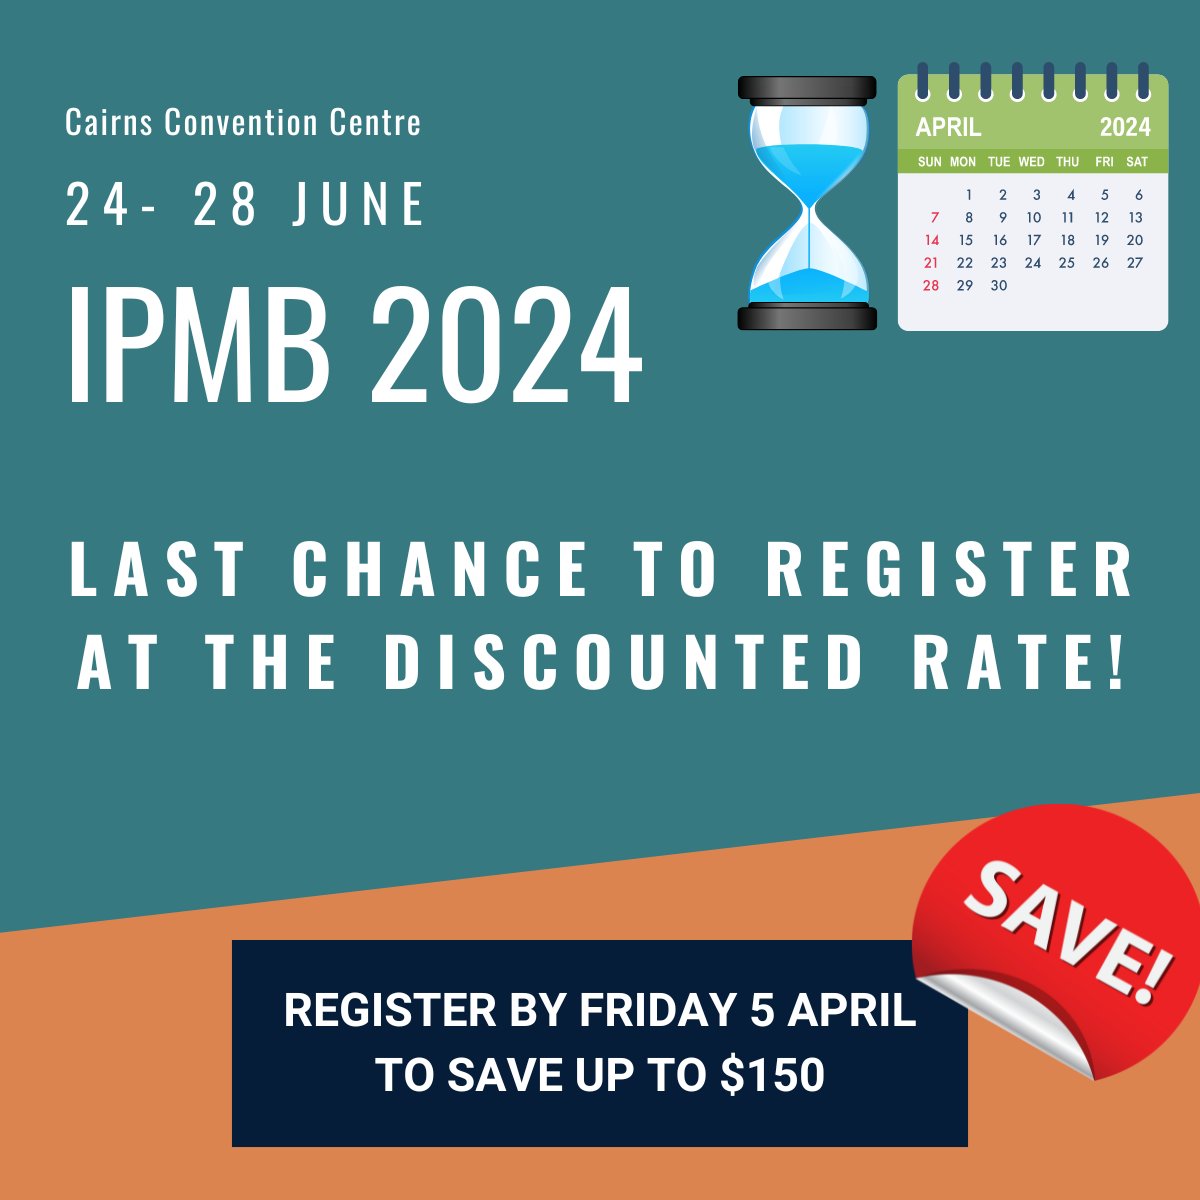 The earlybird extension is closing in less than 24 hours! Register by Friday 5 April to save up to $150! Visit ipmb2024.org for more information.